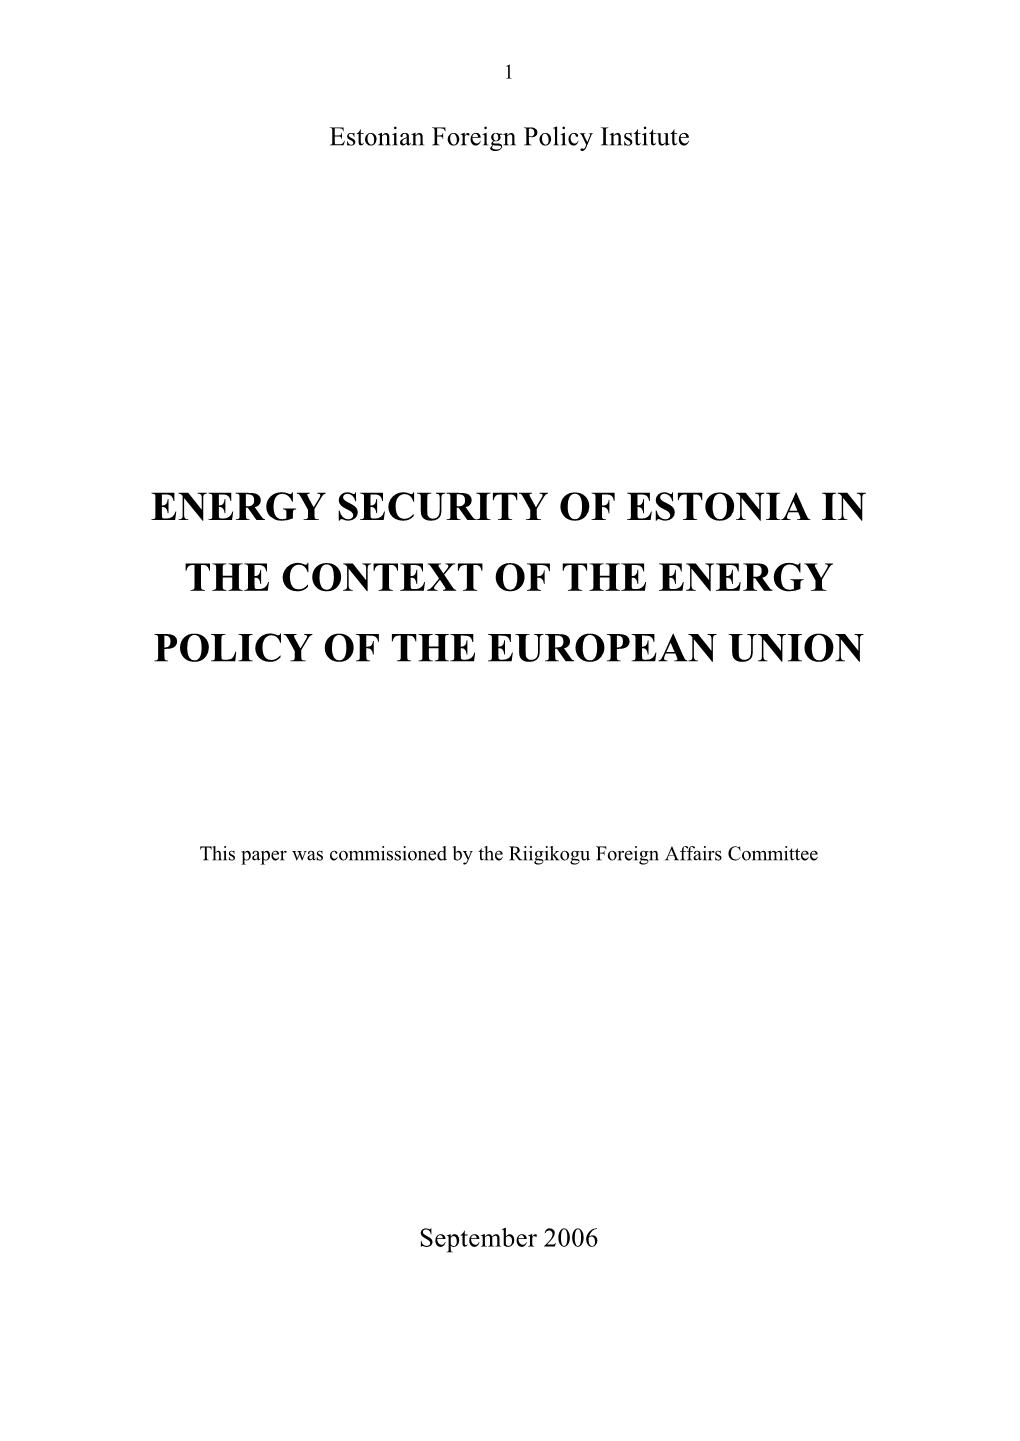 Energy Security of Estonia in the Context of the Energy Policy of the European Union